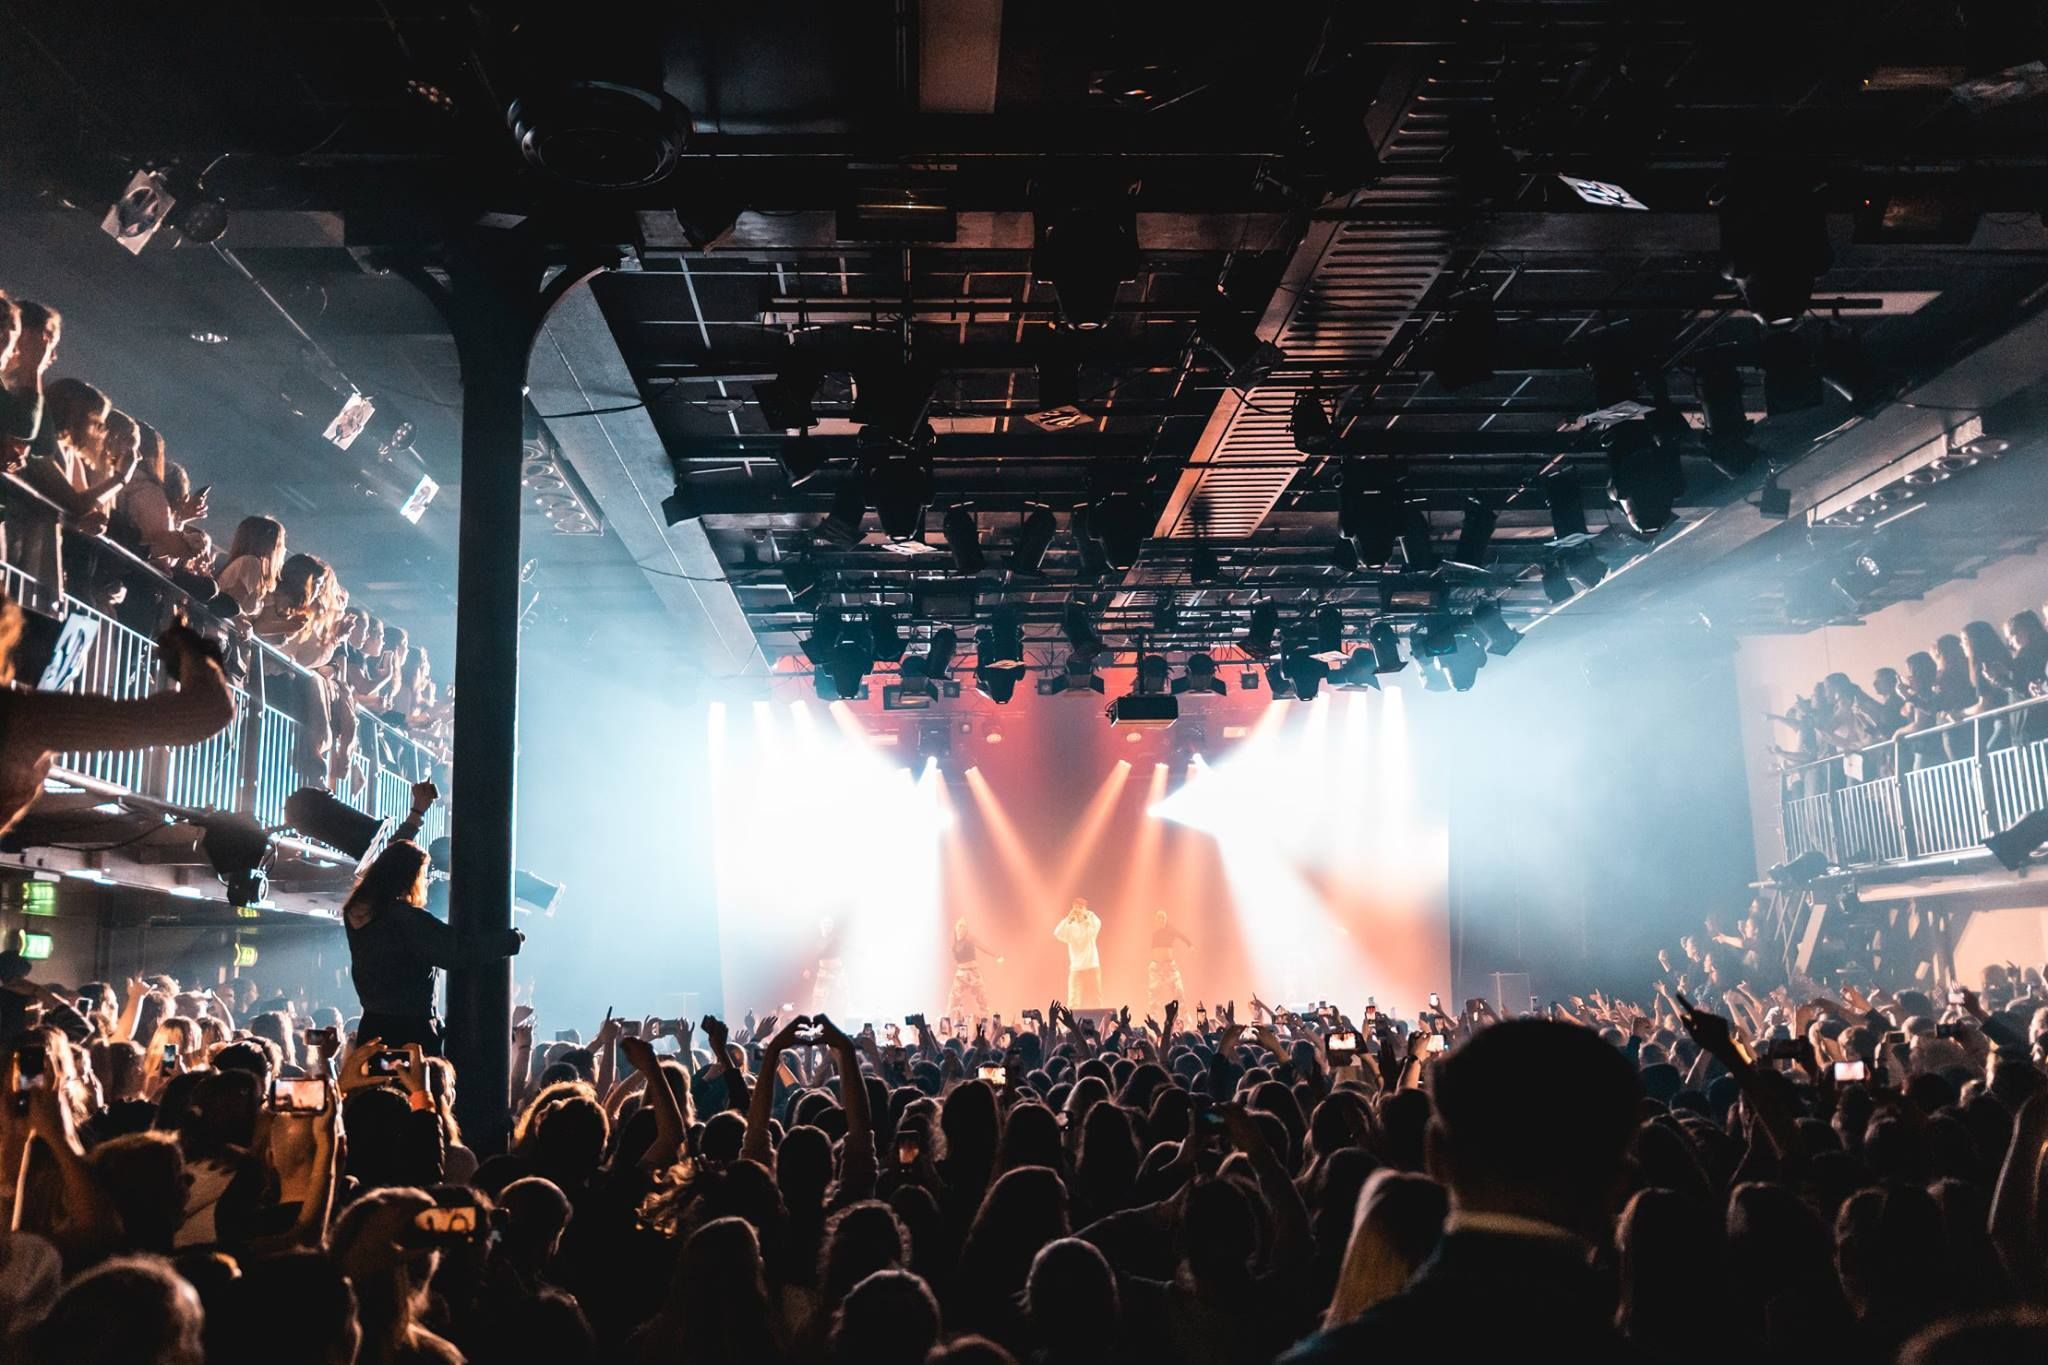 A dancing crowd within the Melkweg with a single singer on the stage.